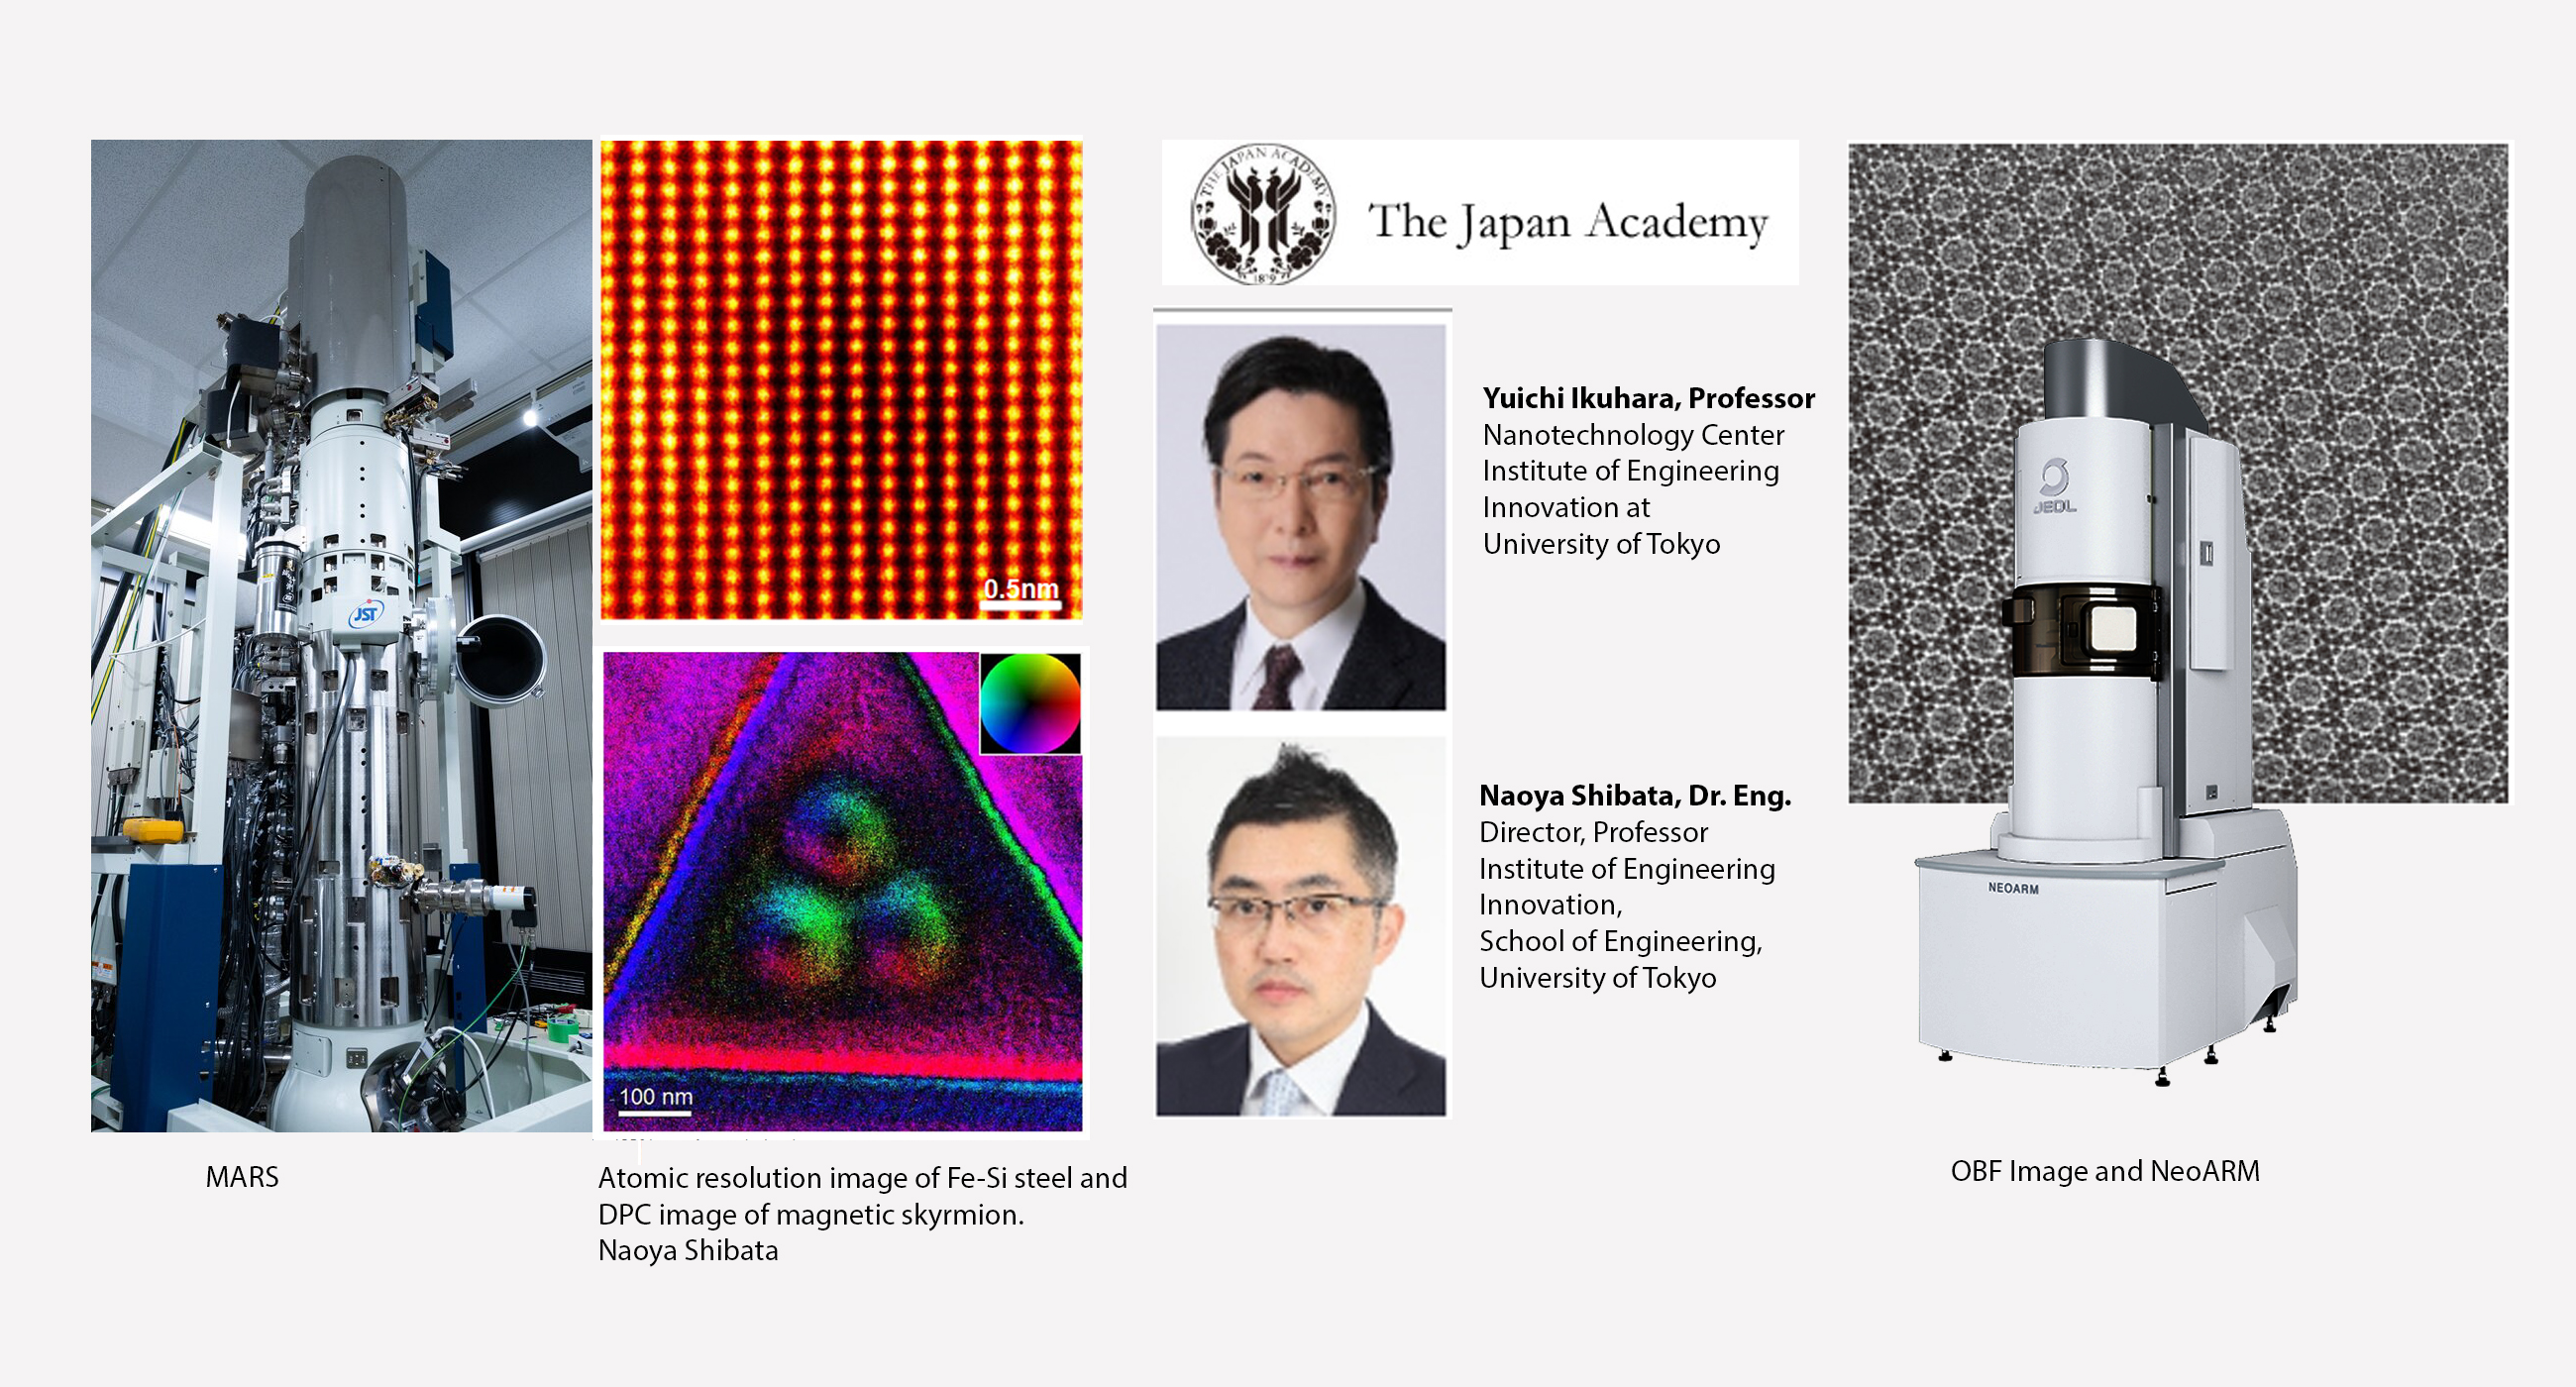 JEOL Collaborators renowned for their innovations with JEOL Electron Microscopes